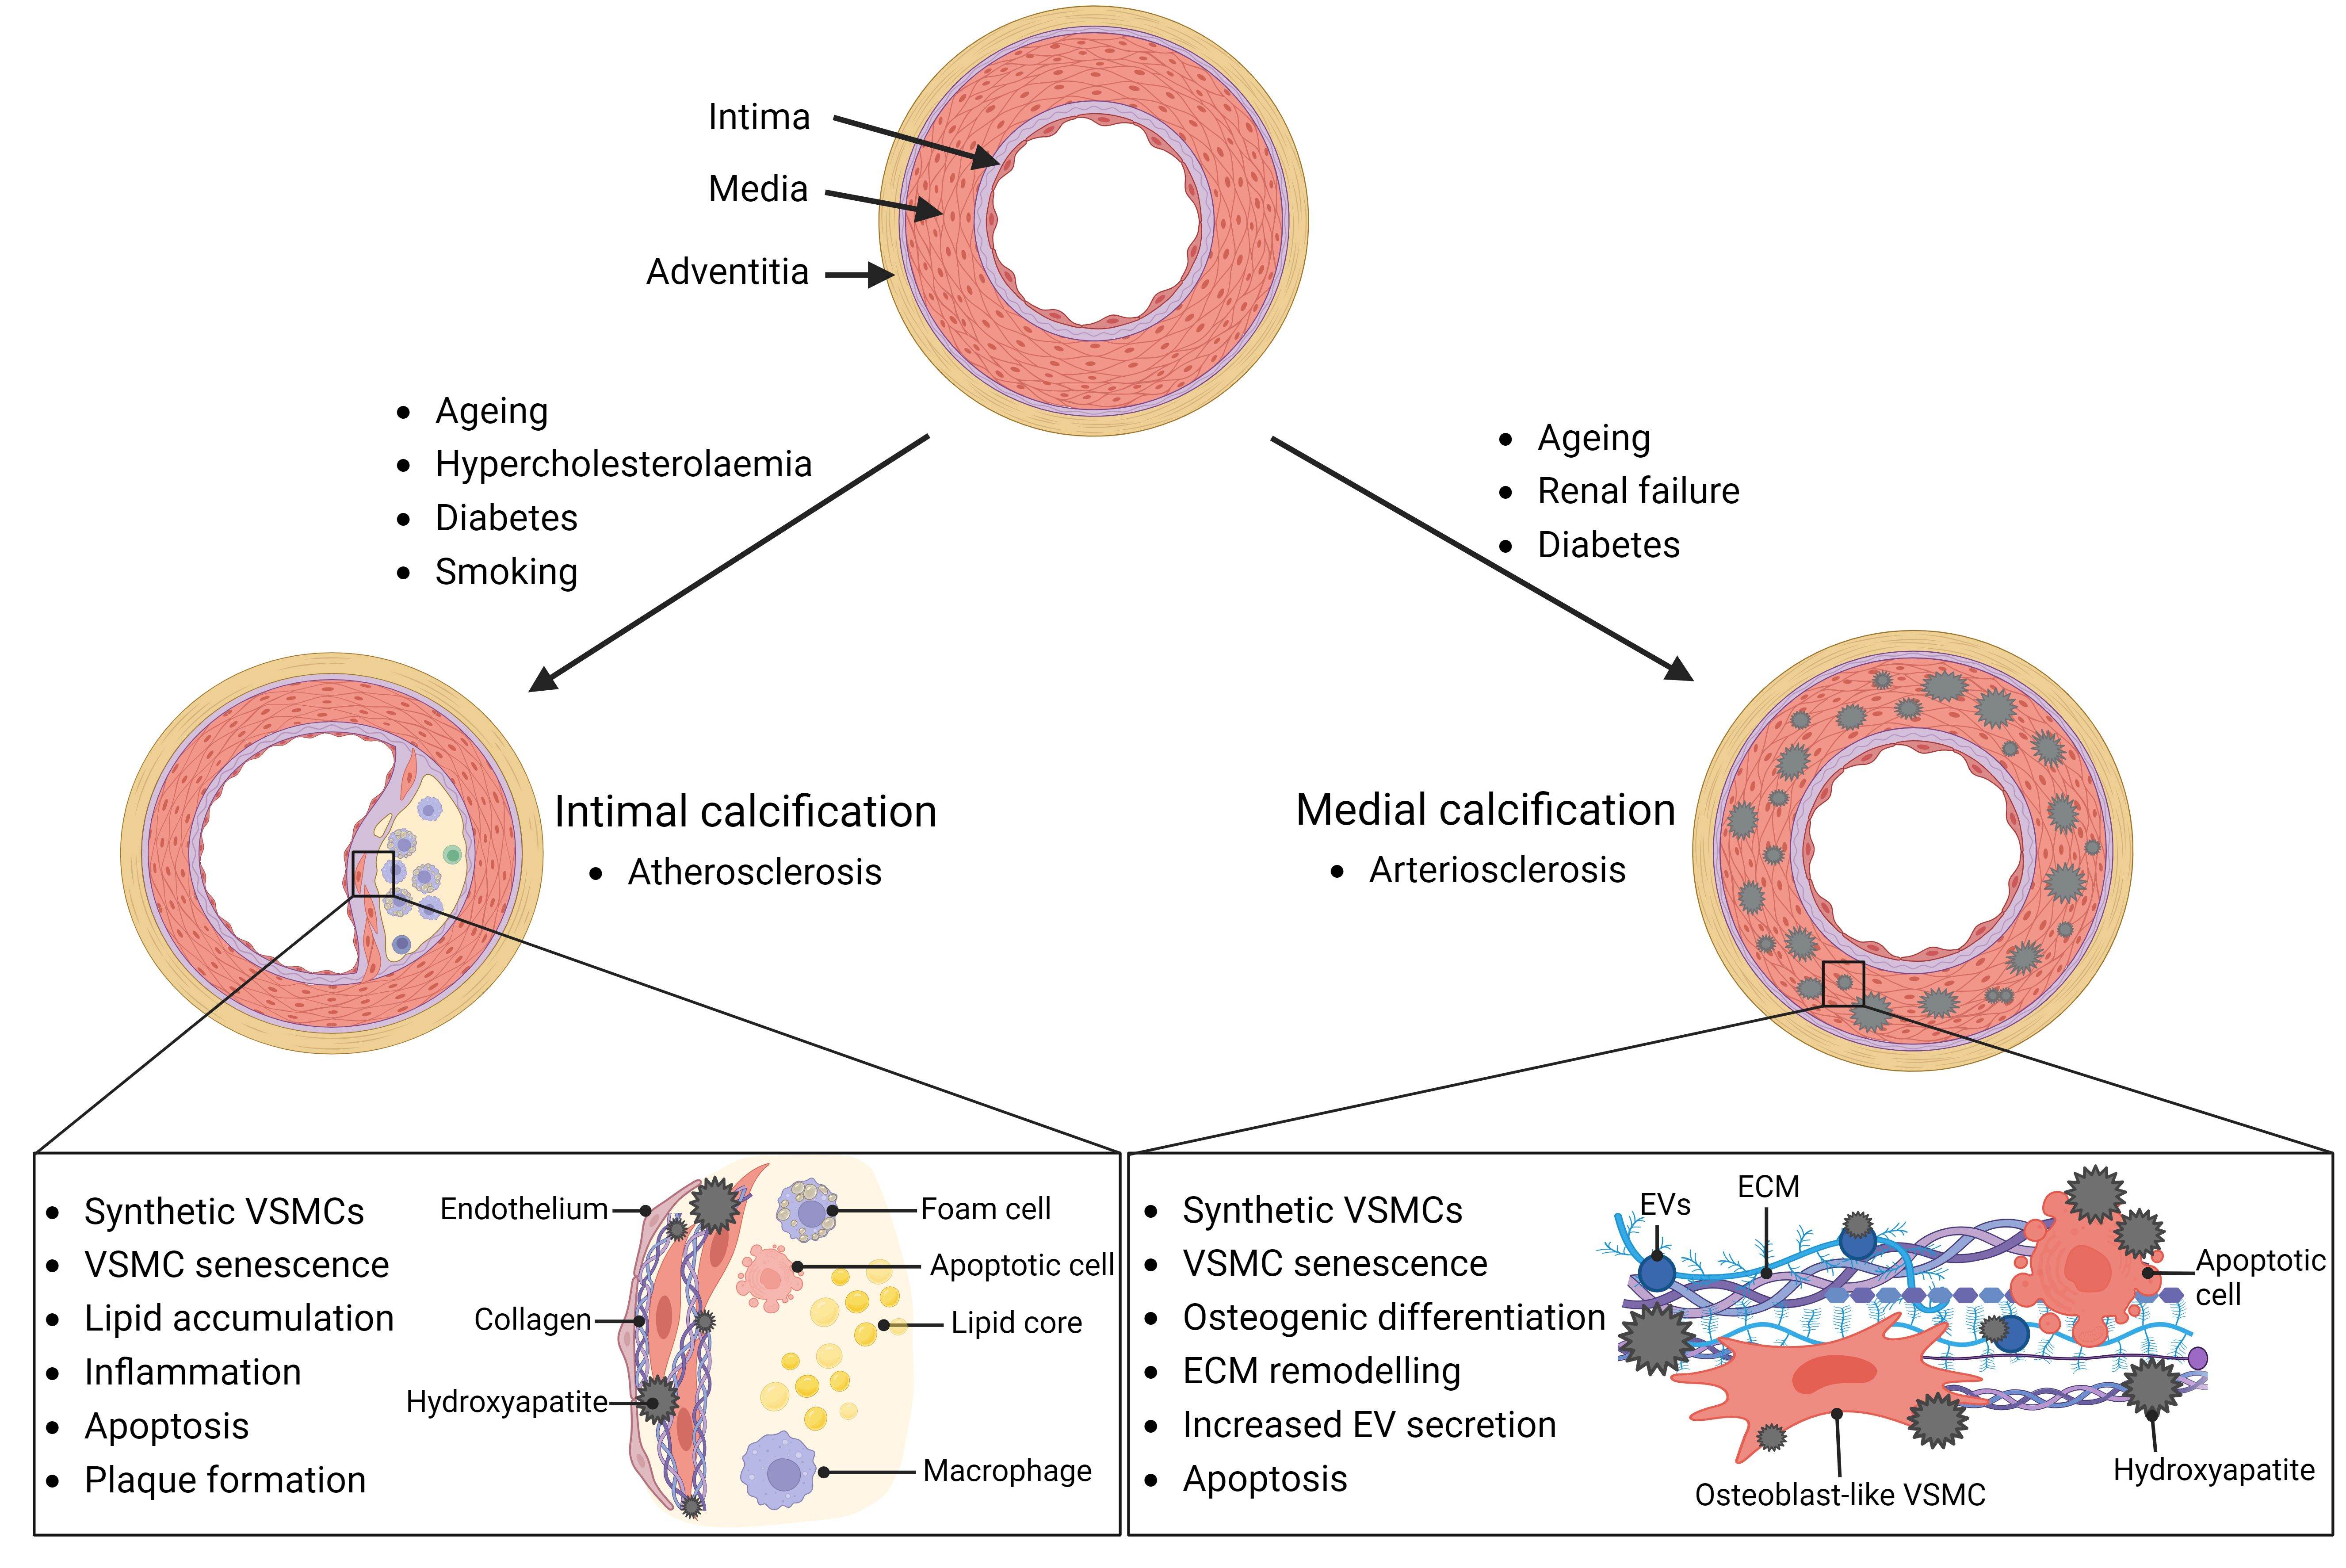 Extracellular vesicles: the key to unlocking mechanisms of age-related vascular disease?